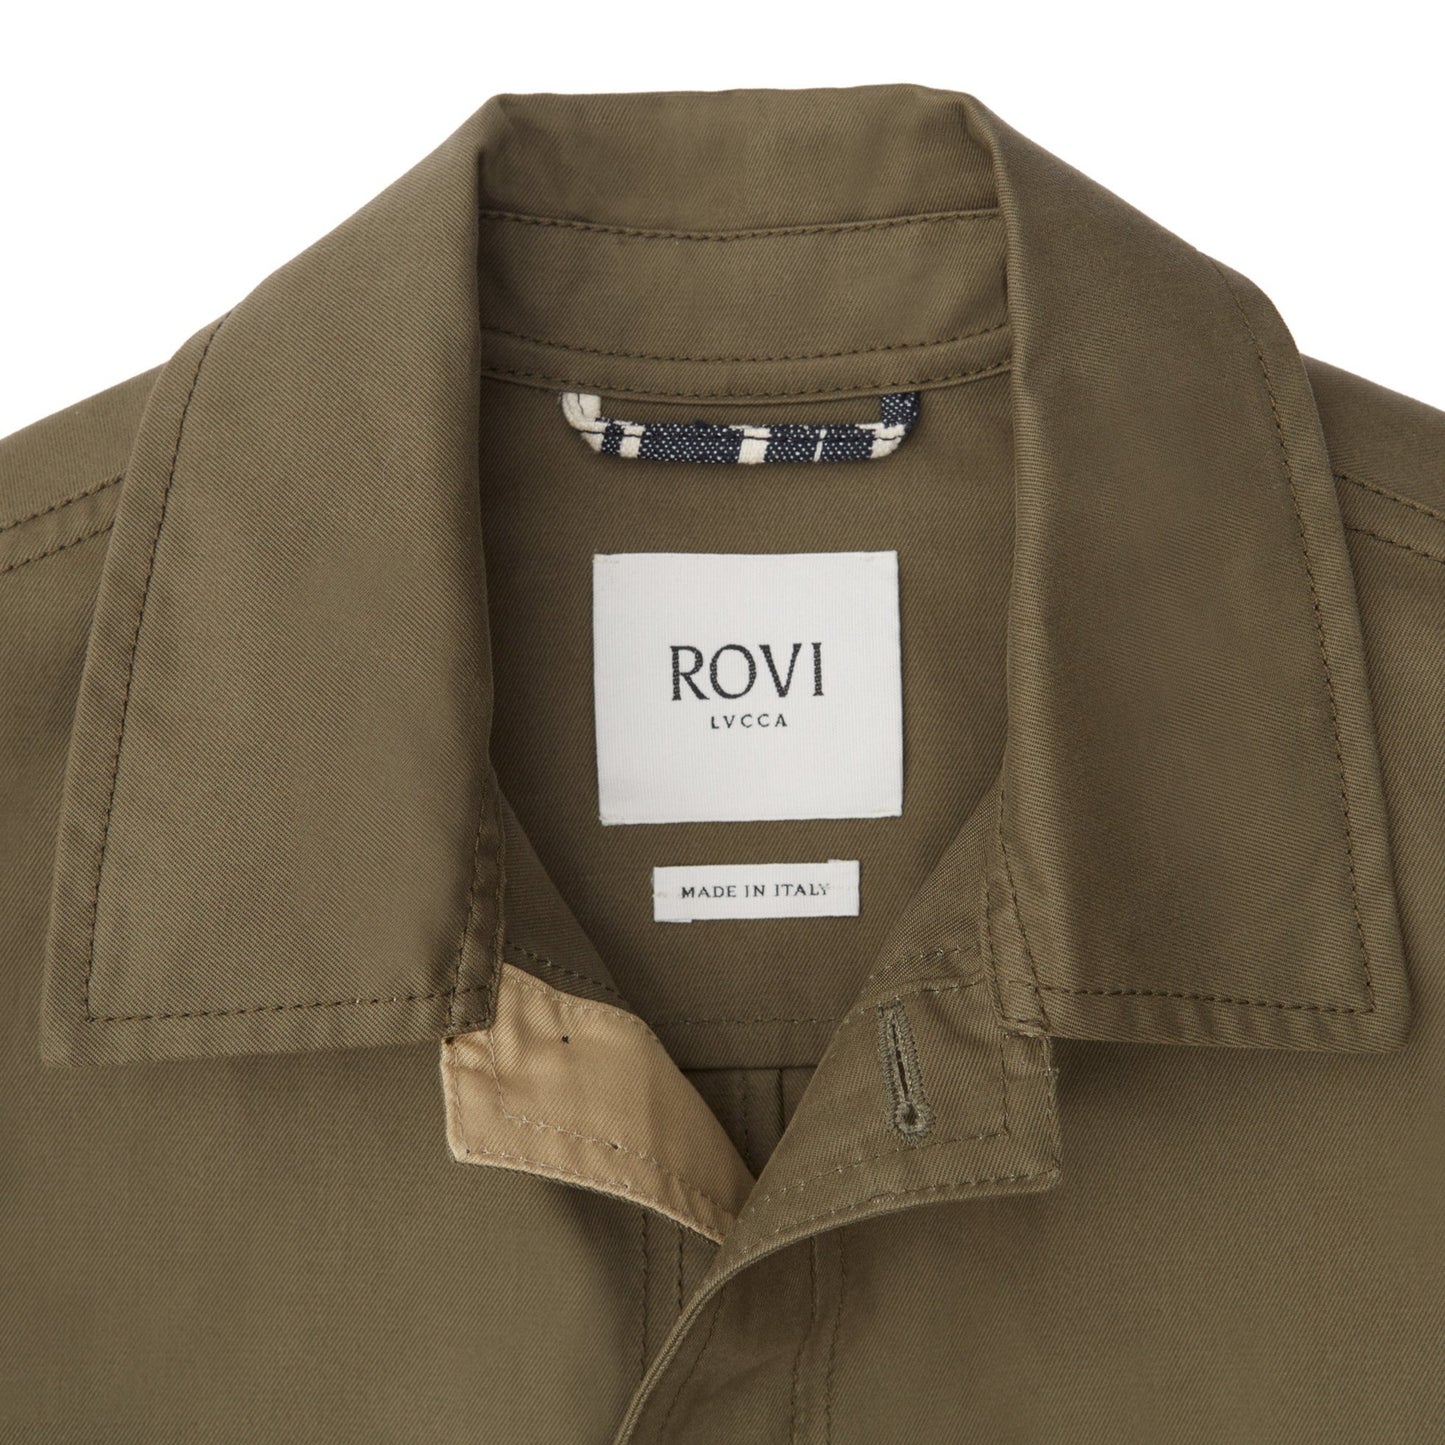 Unlined Garden Jacket in Green and Beige Cotton Twill